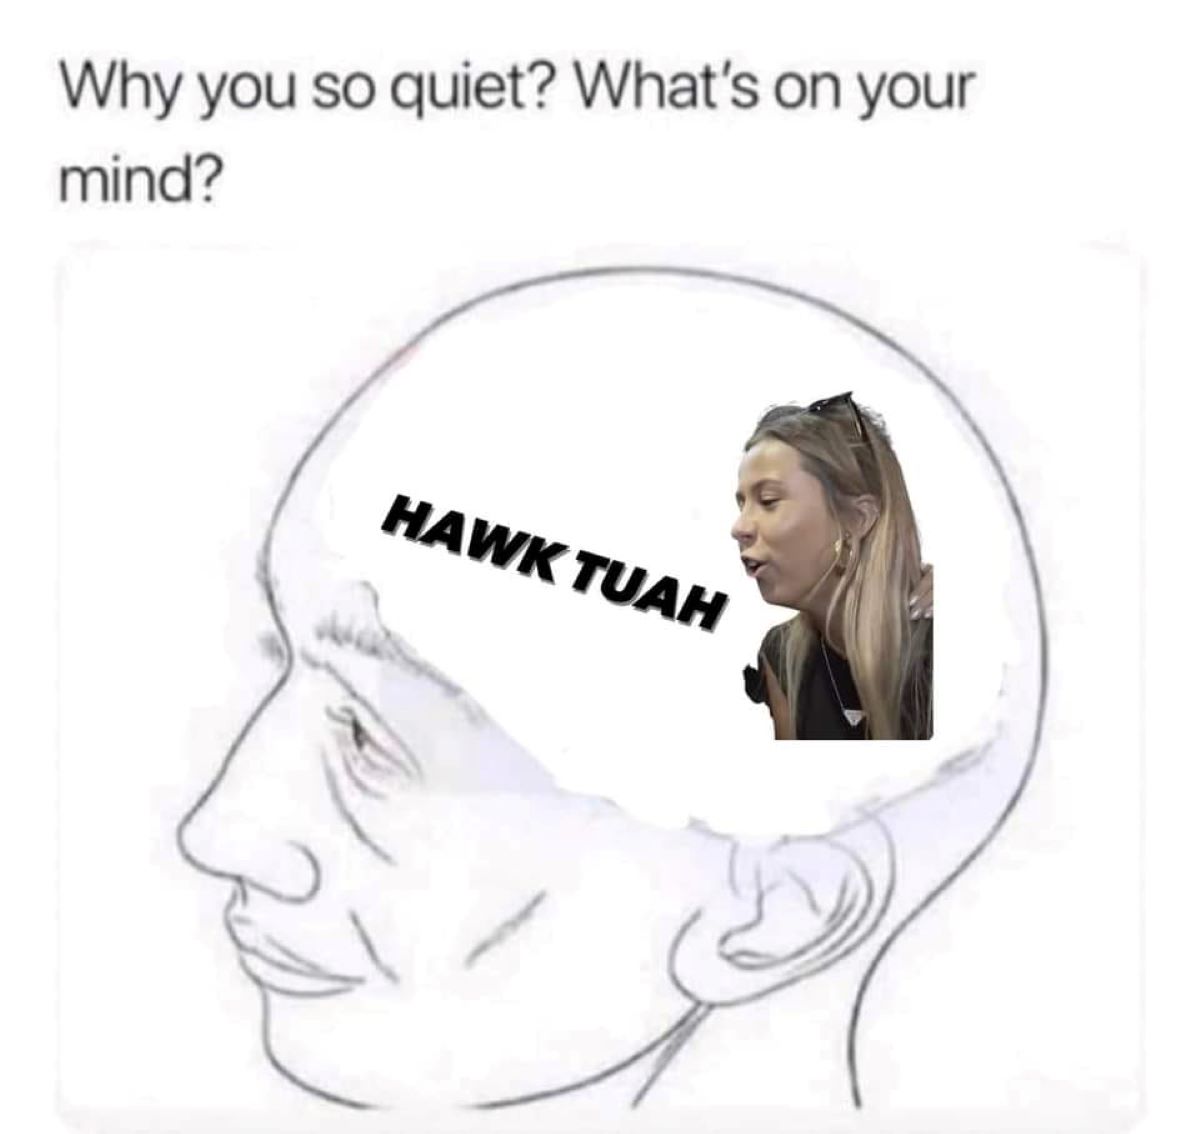 what's on your mind tiktok - Why you so quiet? What's on your mind? Hawk Tuah